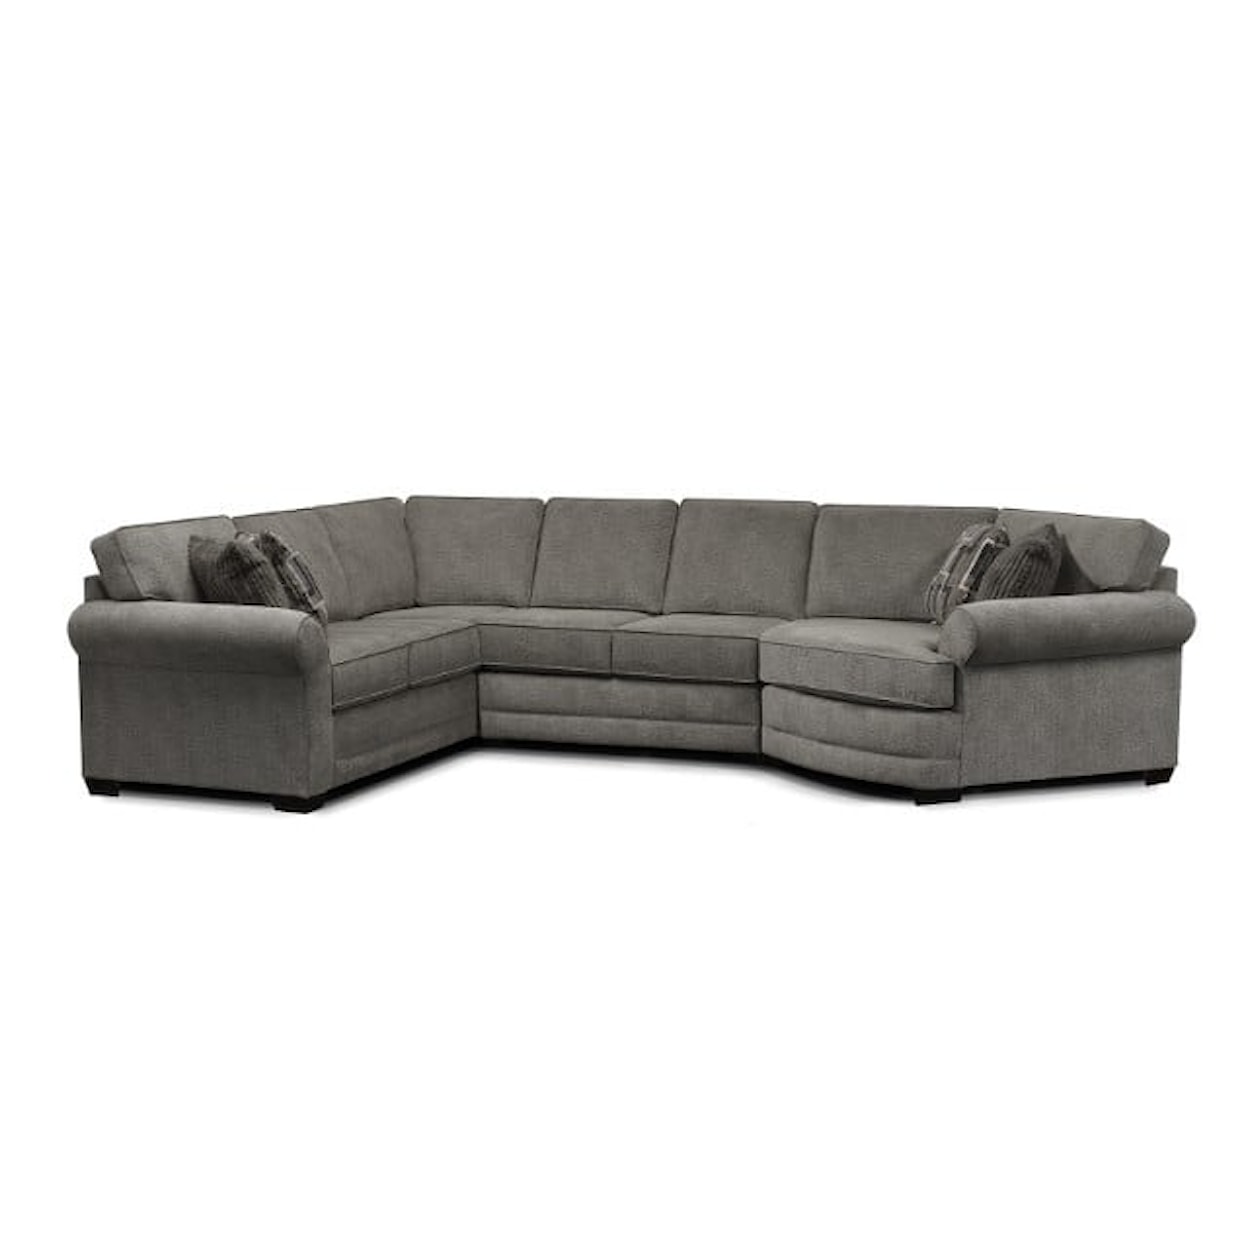 England 5630 Series 3-Piece Sectional Sofa With Cuddler